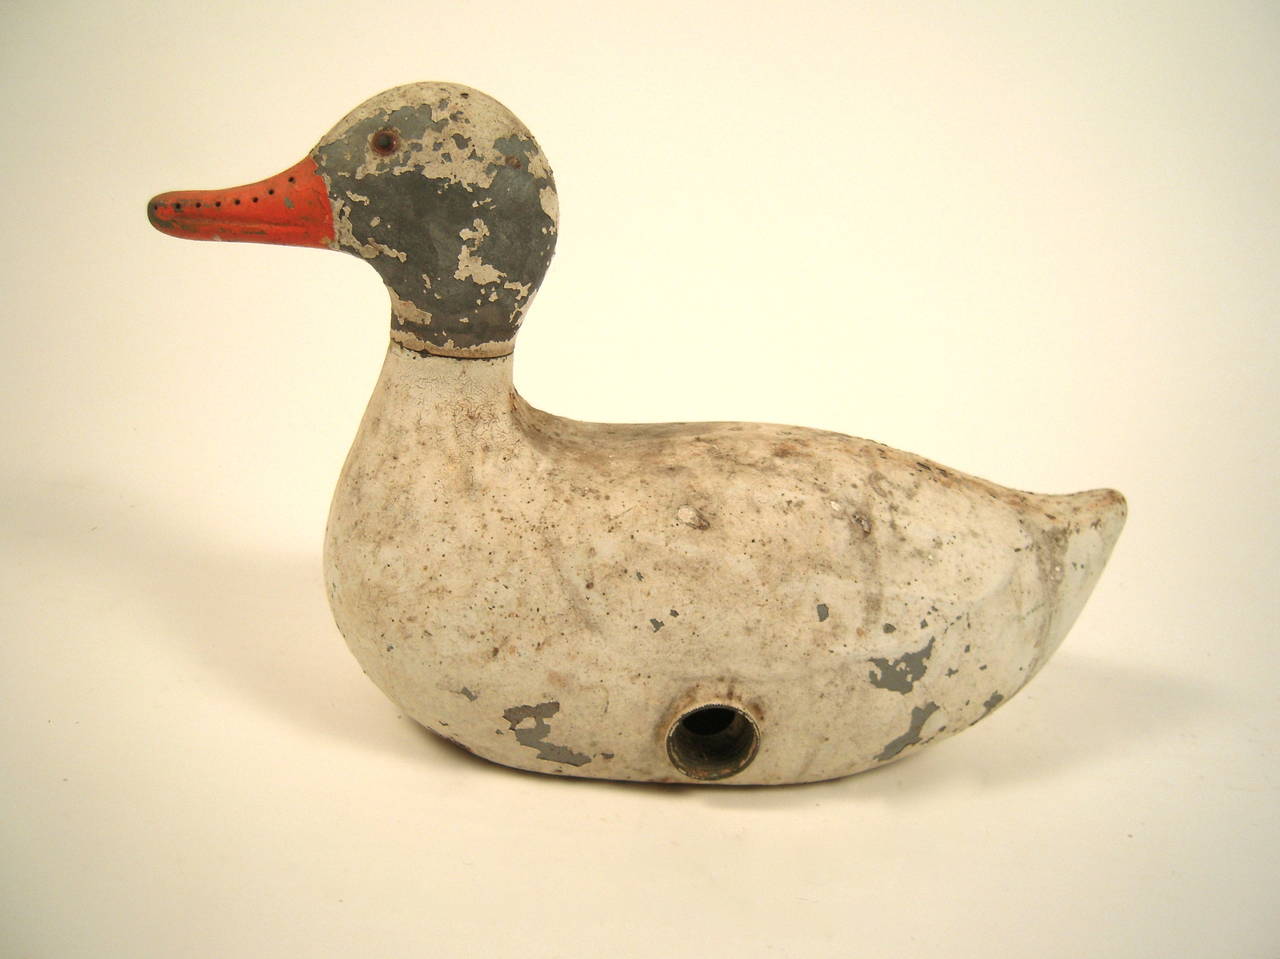 A whimsical cast metal duck sprinkler in old white paint with a turning grey painted head orange beak and one glass eye. The head, which is perforated for water to come out, is designed to rotate when functioning as a sprinkler. Whimsical.